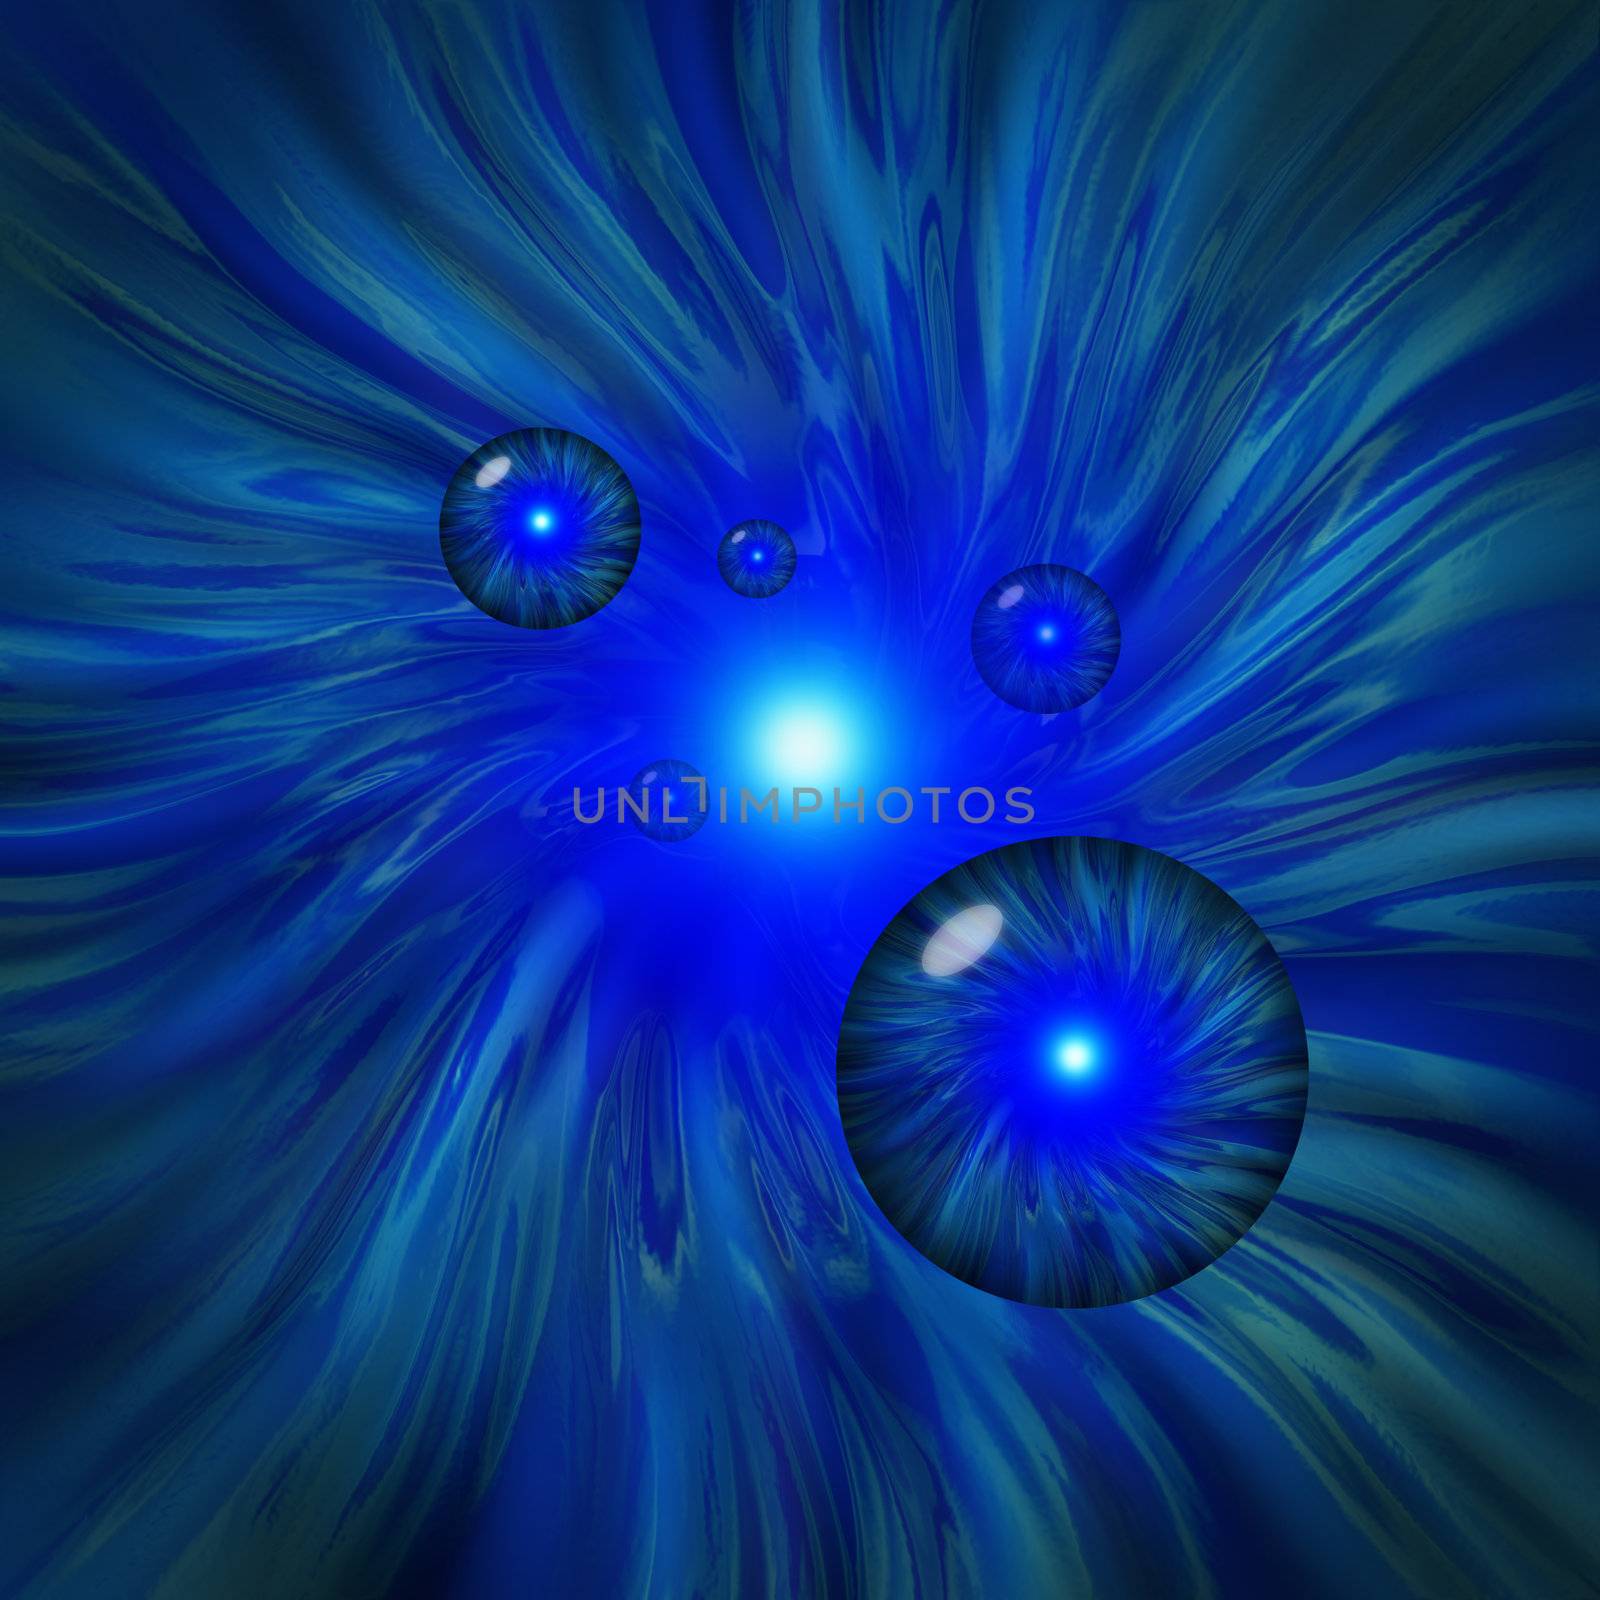 Blue vortex with spheres flying through wormhole